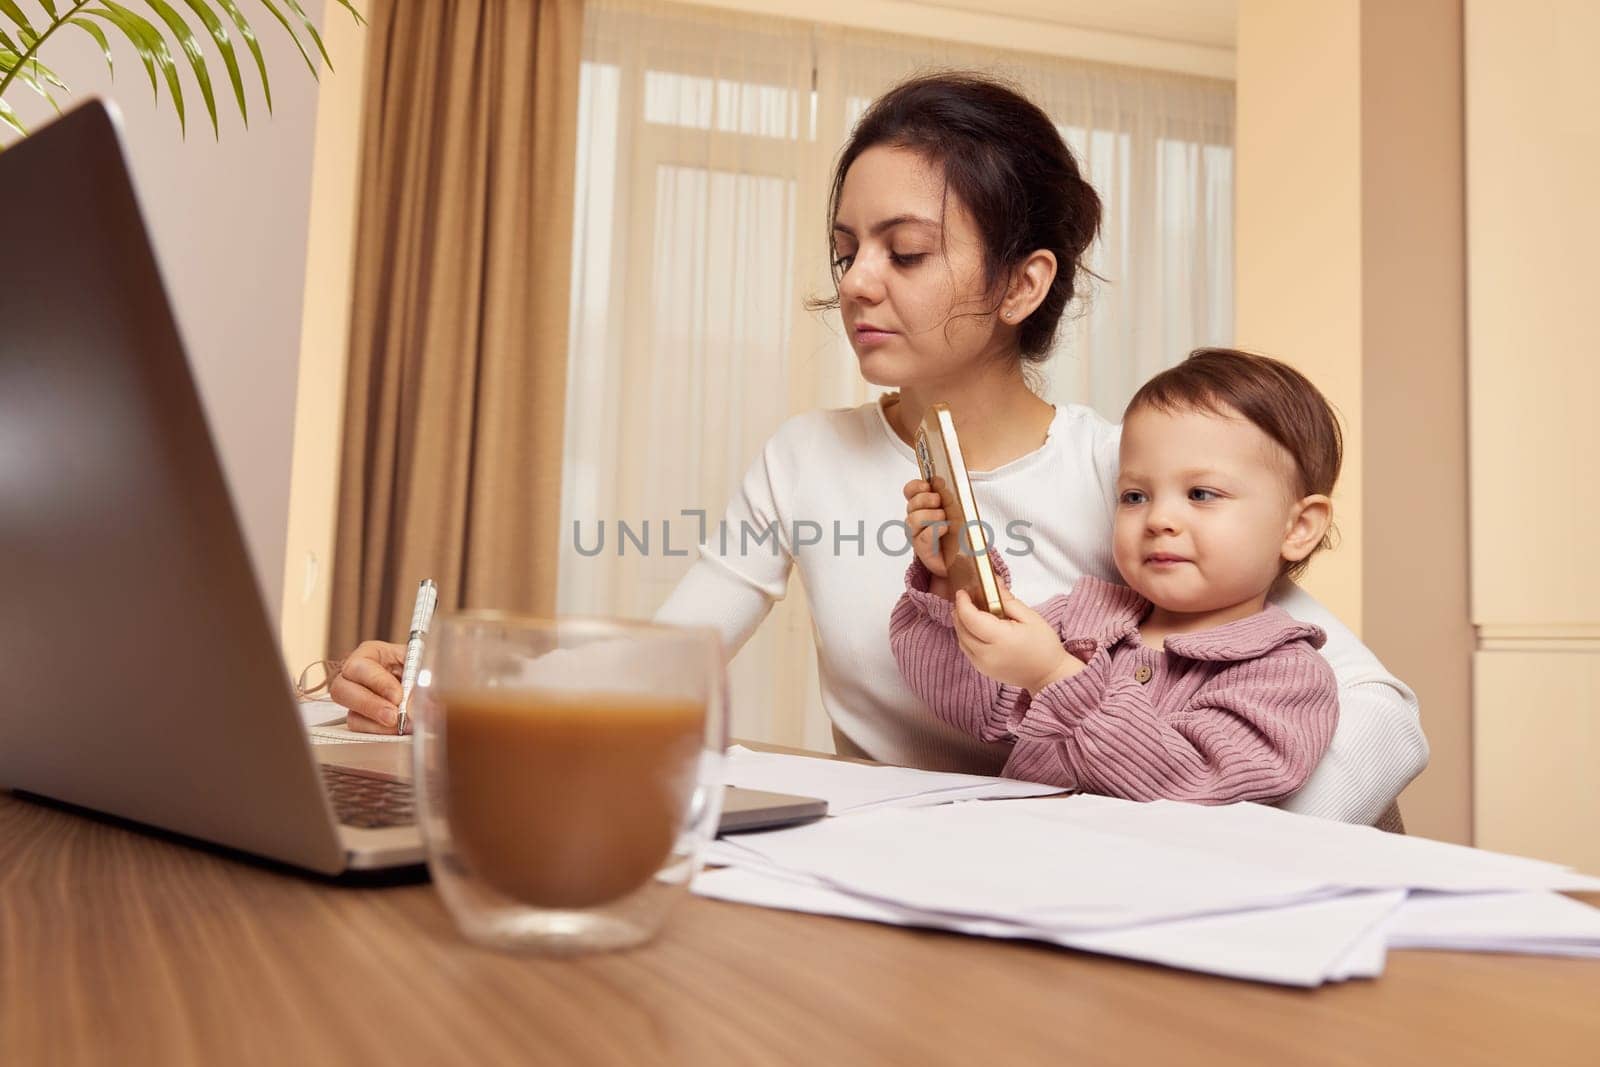 Cheerful pretty businesswoman working on laptop at home with her little child girl